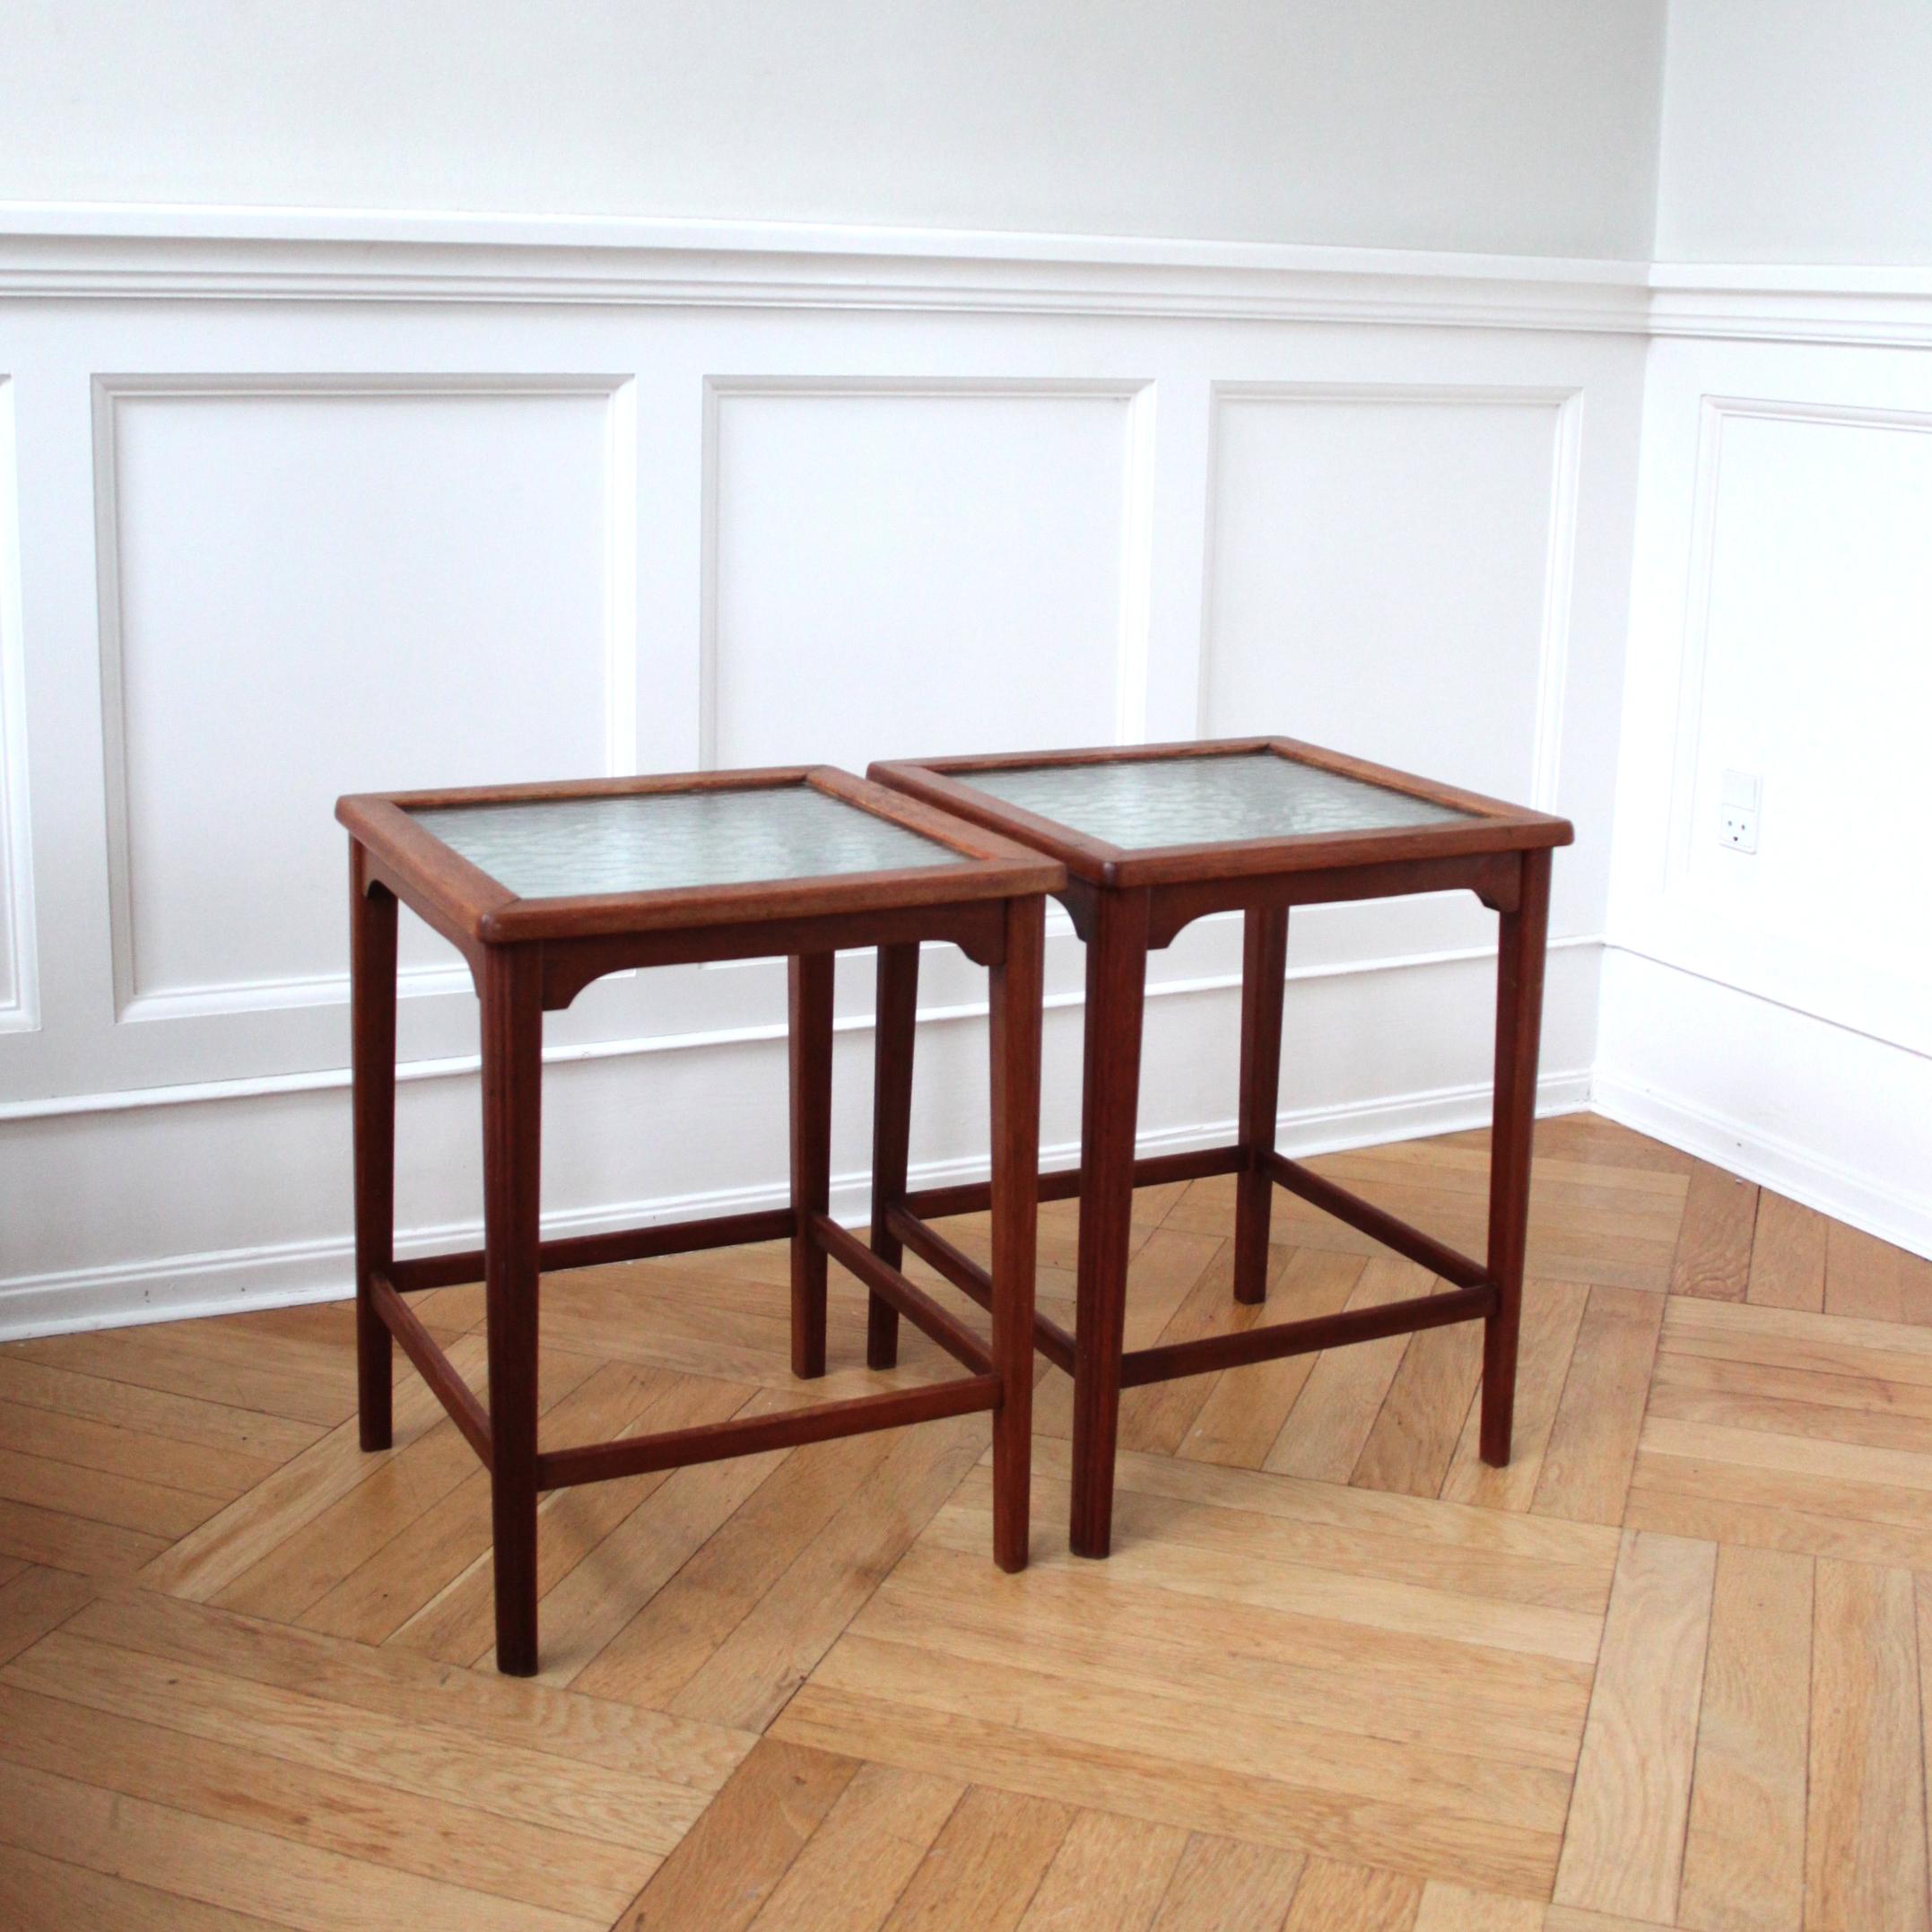 Pair of Scandinavian Modern Side Tables, Mahogany and Decorative Glass, 1940s  In Good Condition For Sale In Copenhagen, DK